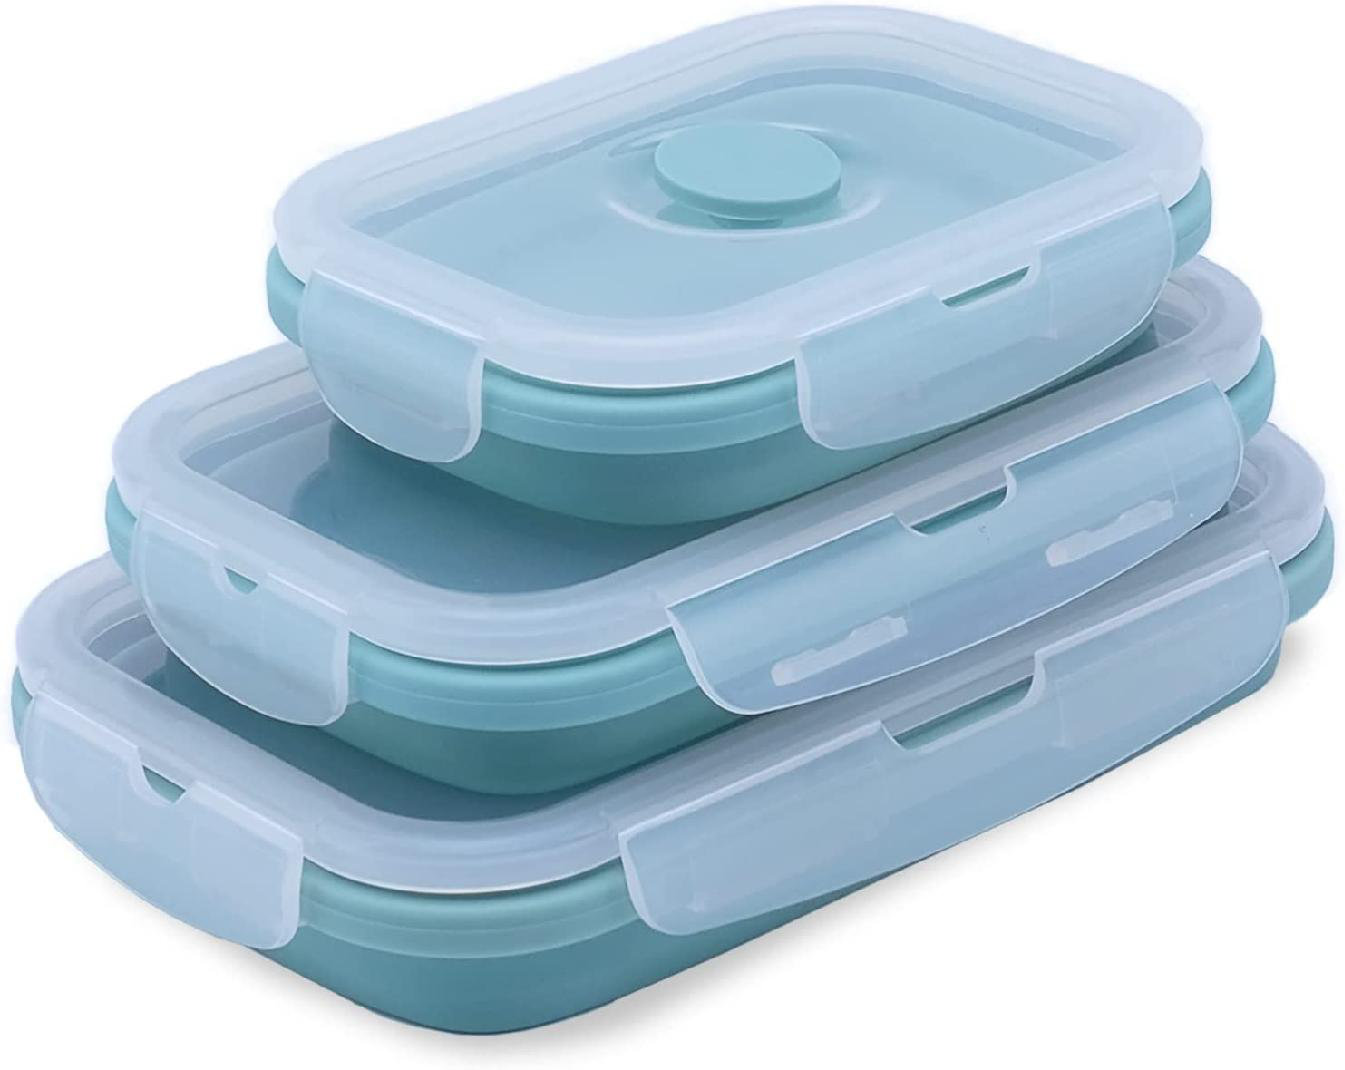 Set of 3 Collapsible Prep Storage Bowls with Snap on Plastic Lid Freezer and Dishwasher Safe Prosmart Kitchen Storage Containers are Microwave 